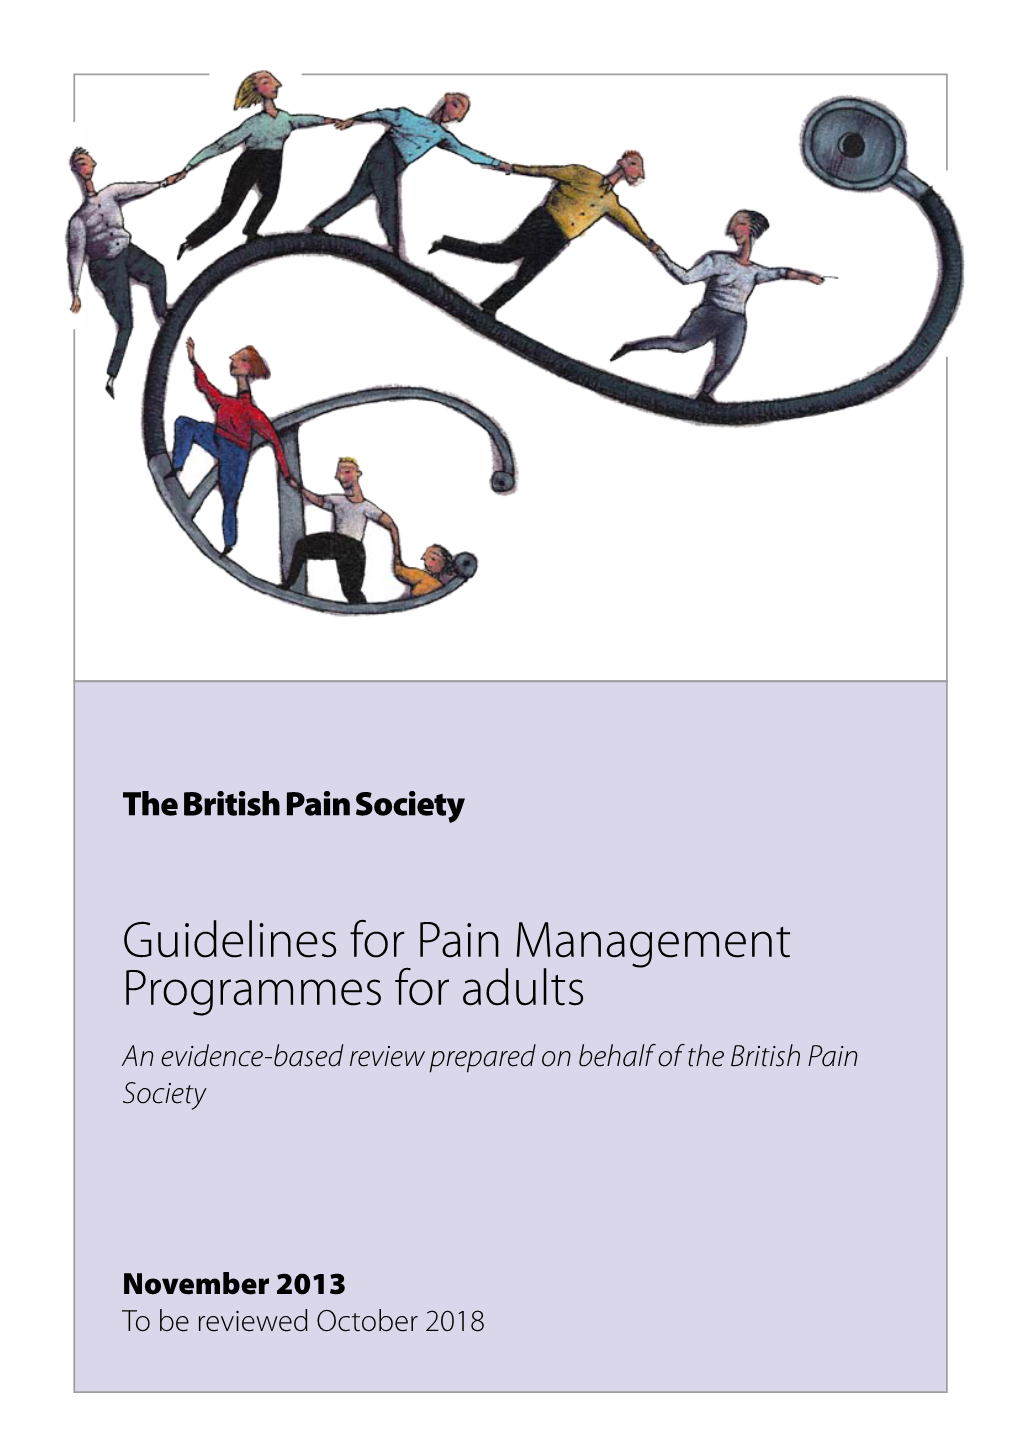 Guidelines for Pain Management Programmes for Adults an Evidence-Based Review Prepared on Behalf of the British Pain Society